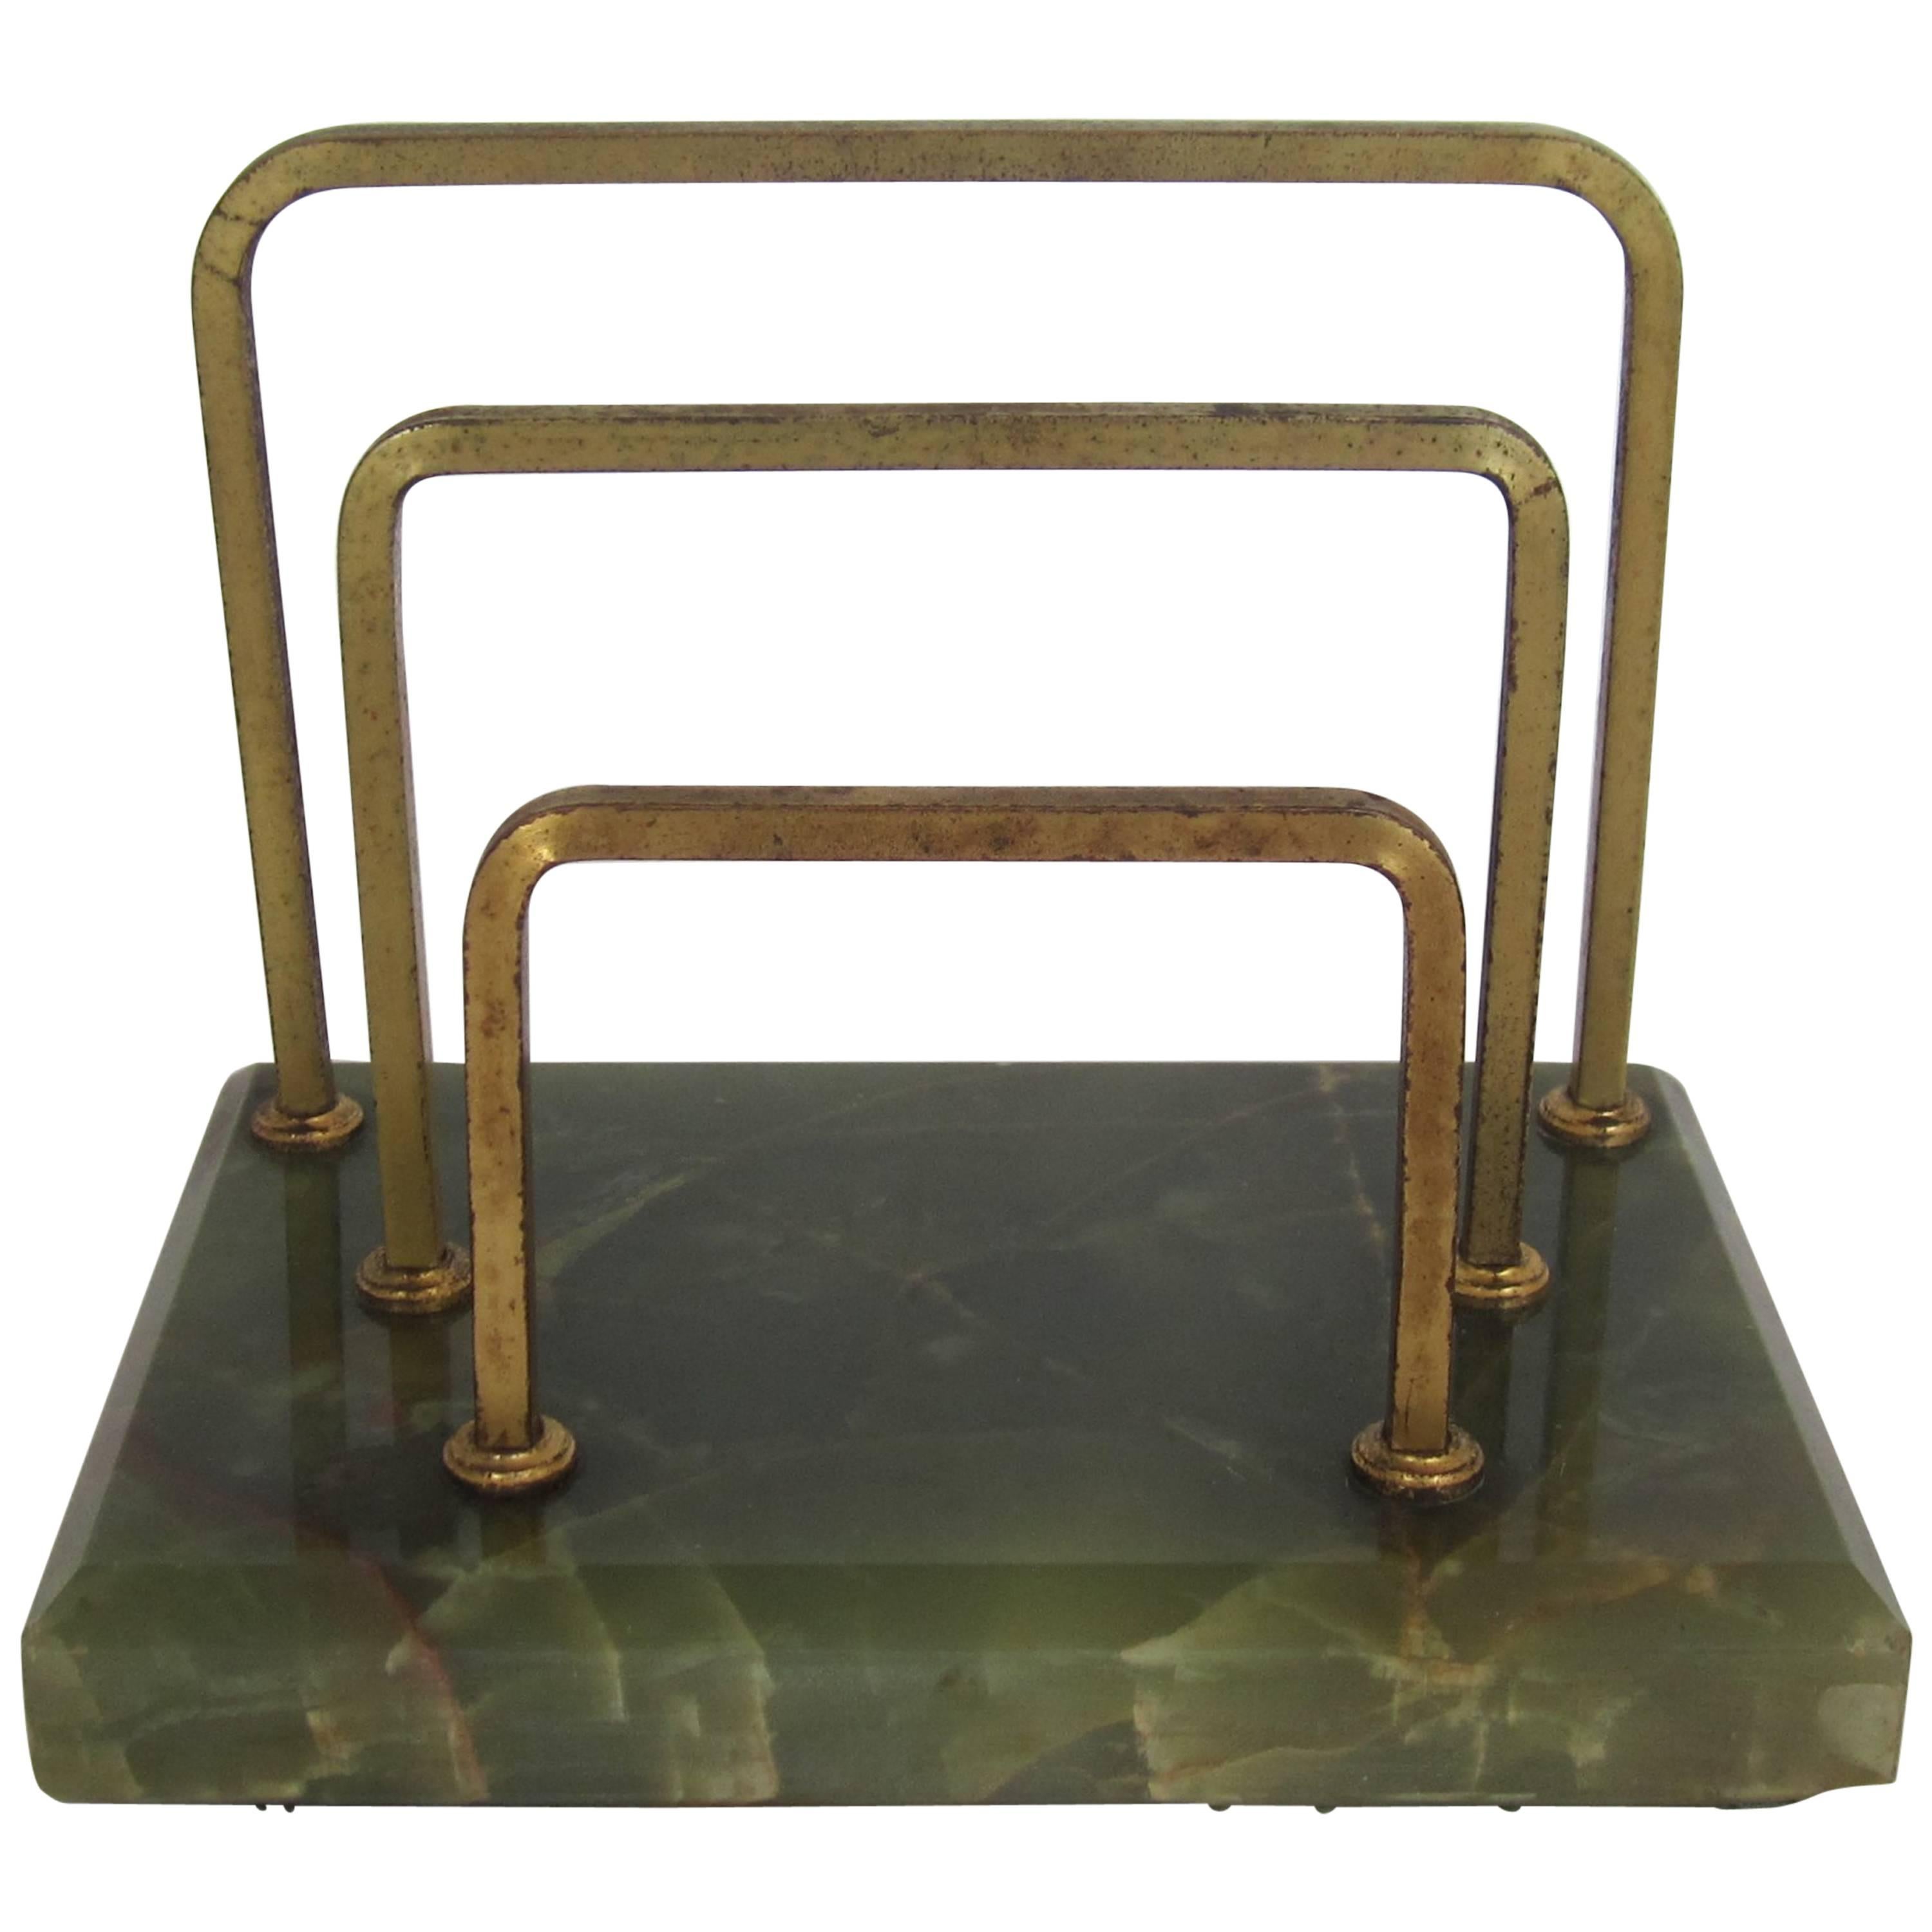 Vintage Brass and Green Onyx Mail or Letter Desk Organizer